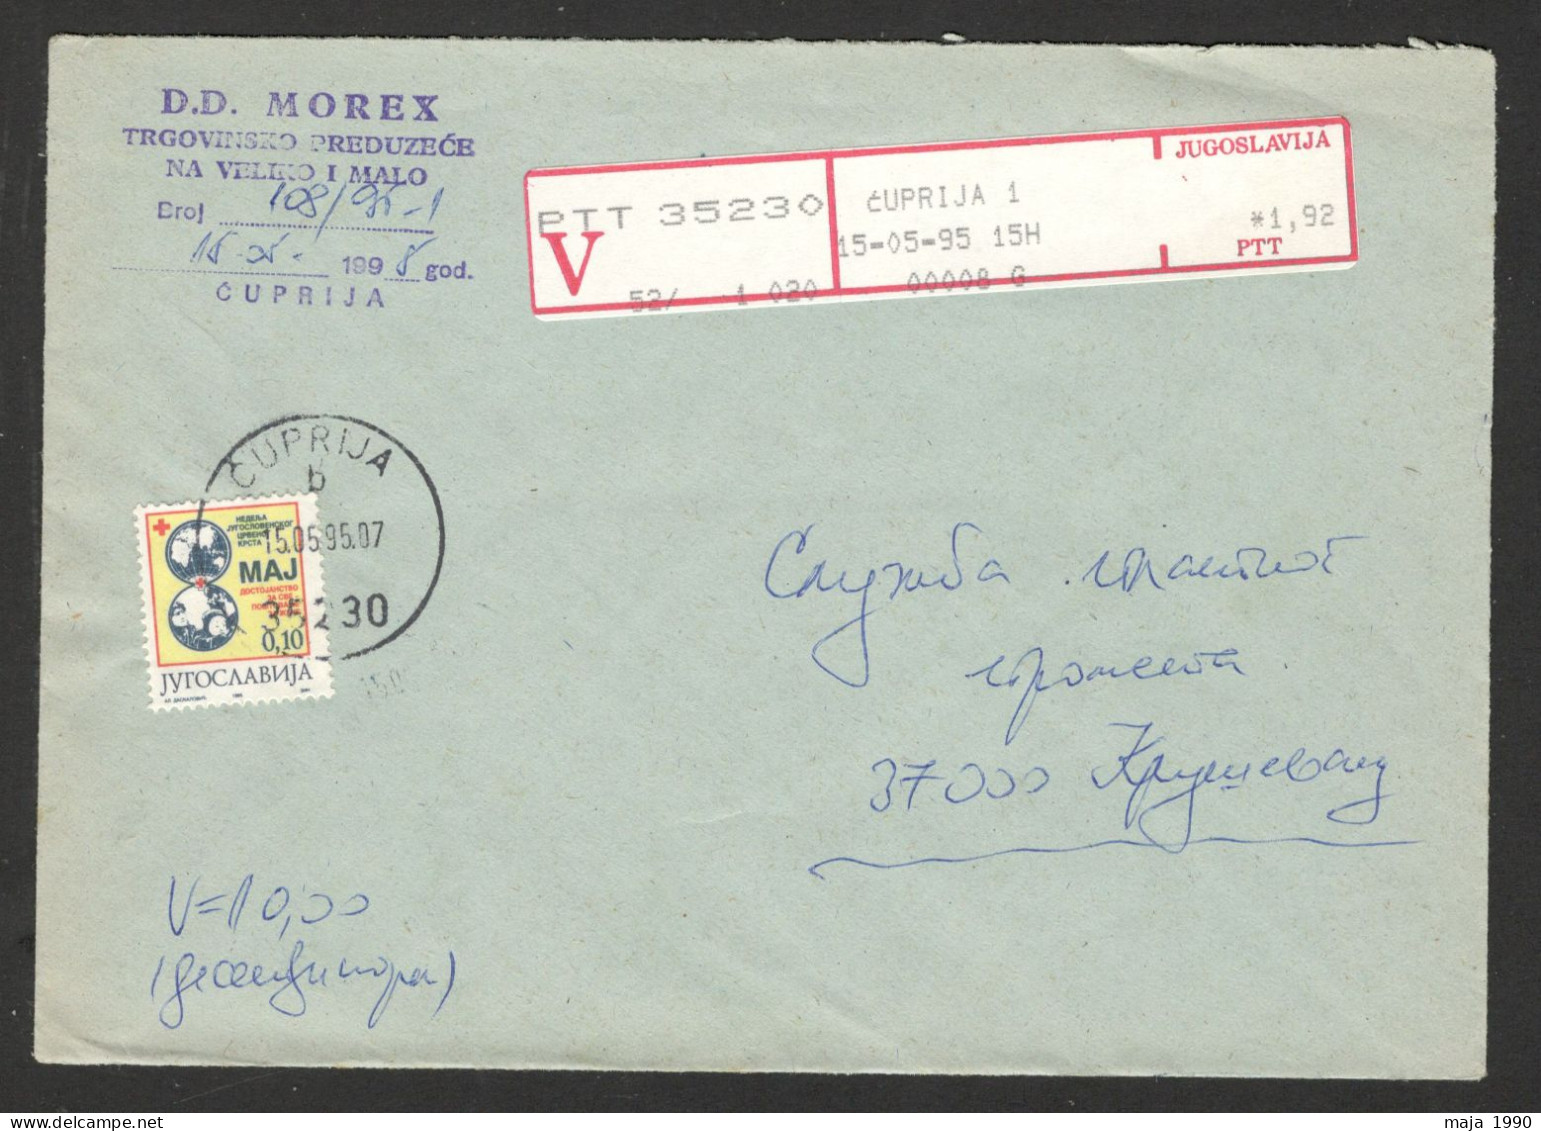 YUGOSLAVIA SERBIA - VALUE OFFICIAL COVER WITH TAX STAMP "RED CROSS" - 1995. - Briefe U. Dokumente